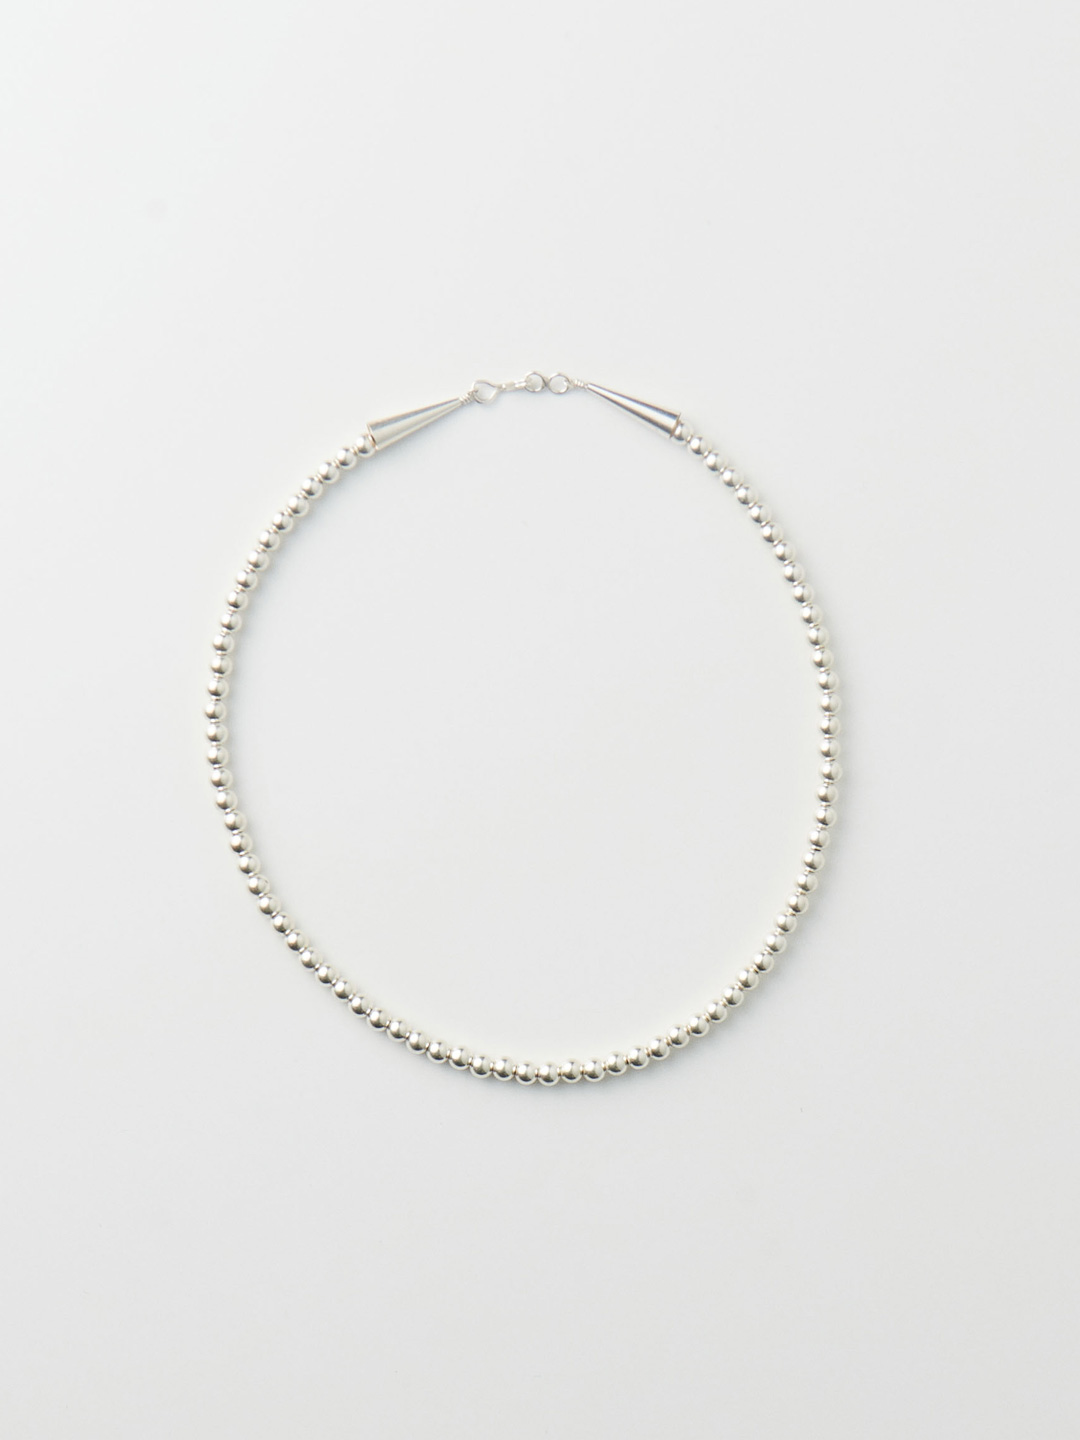 5mm Ball Chain Necklace 40cm - Silver